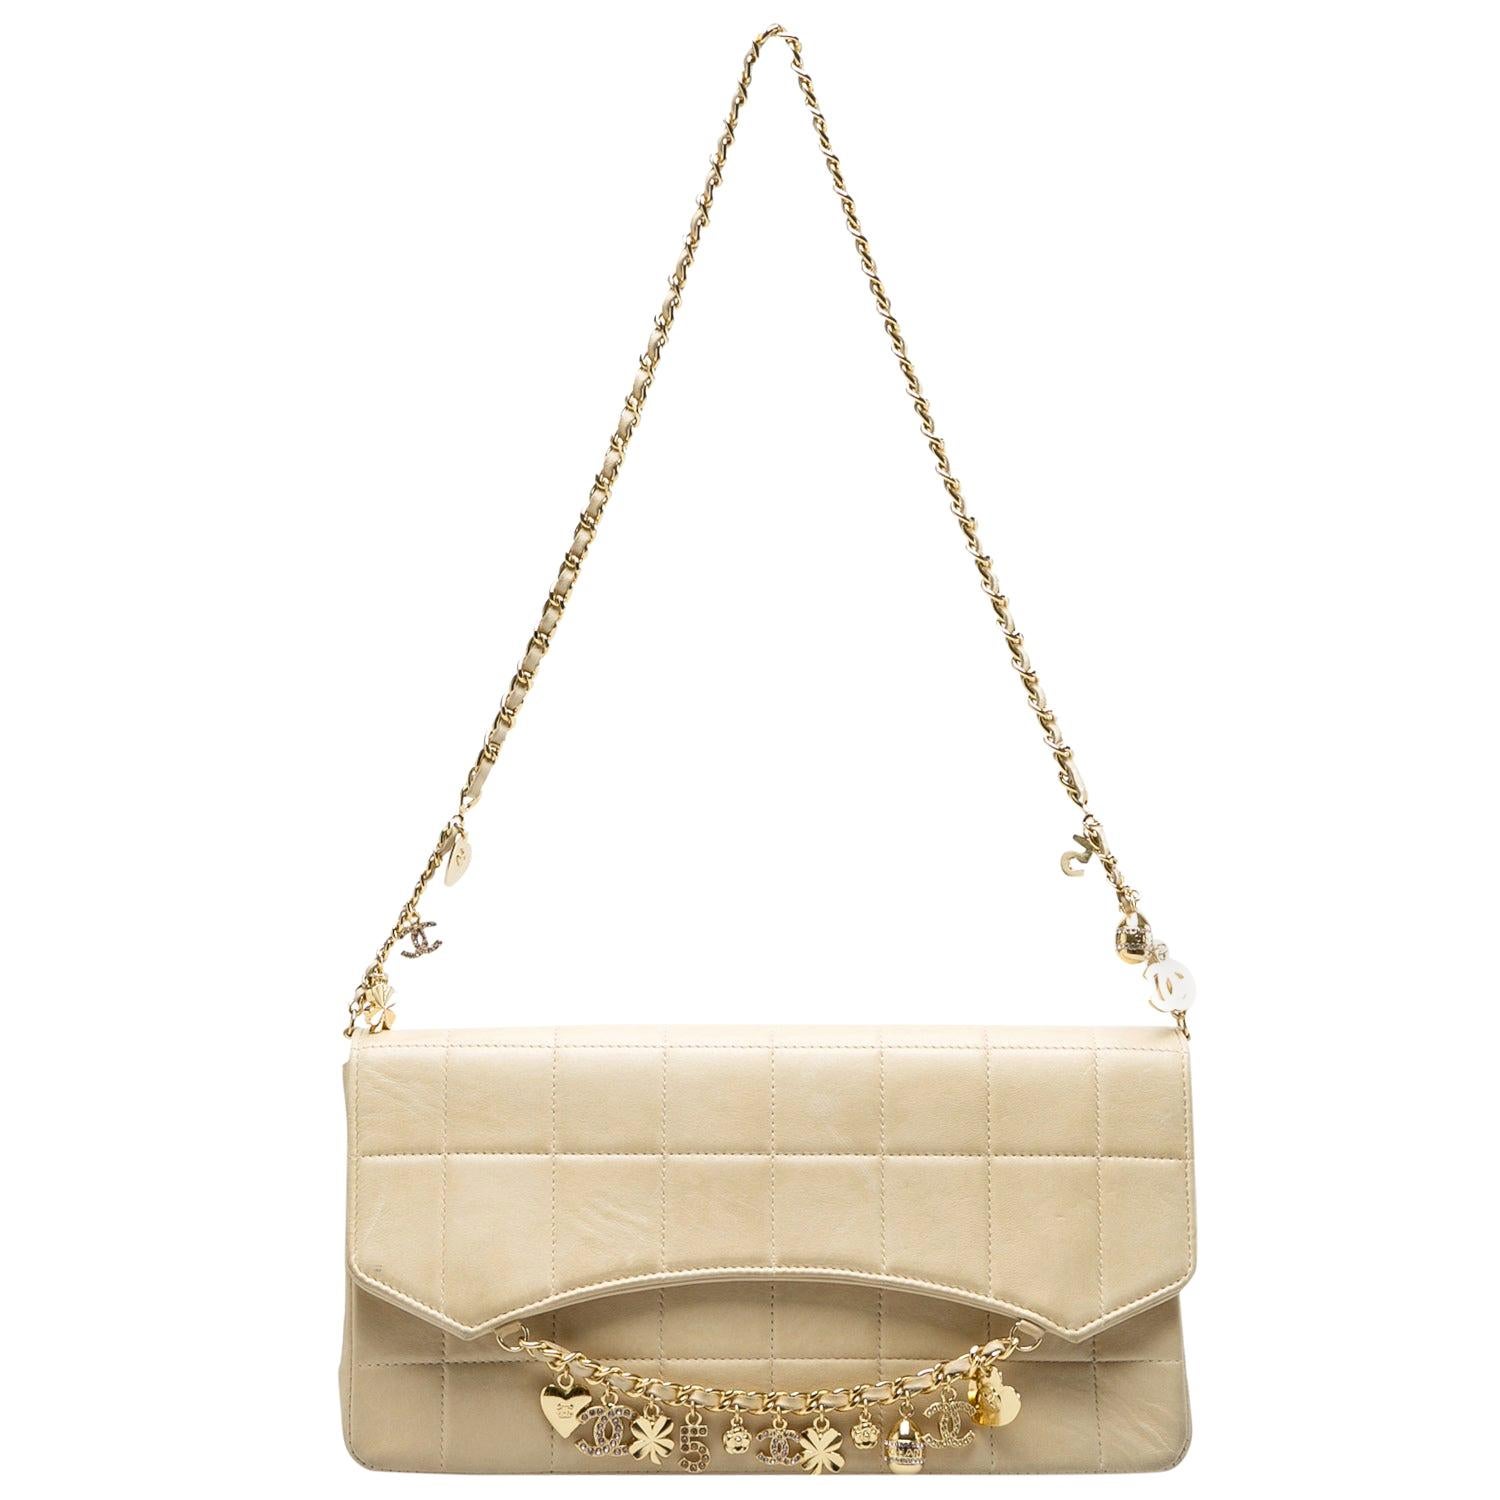 Chanel Beige Chocolate Bar Leather Lucky Charms Chain Bag